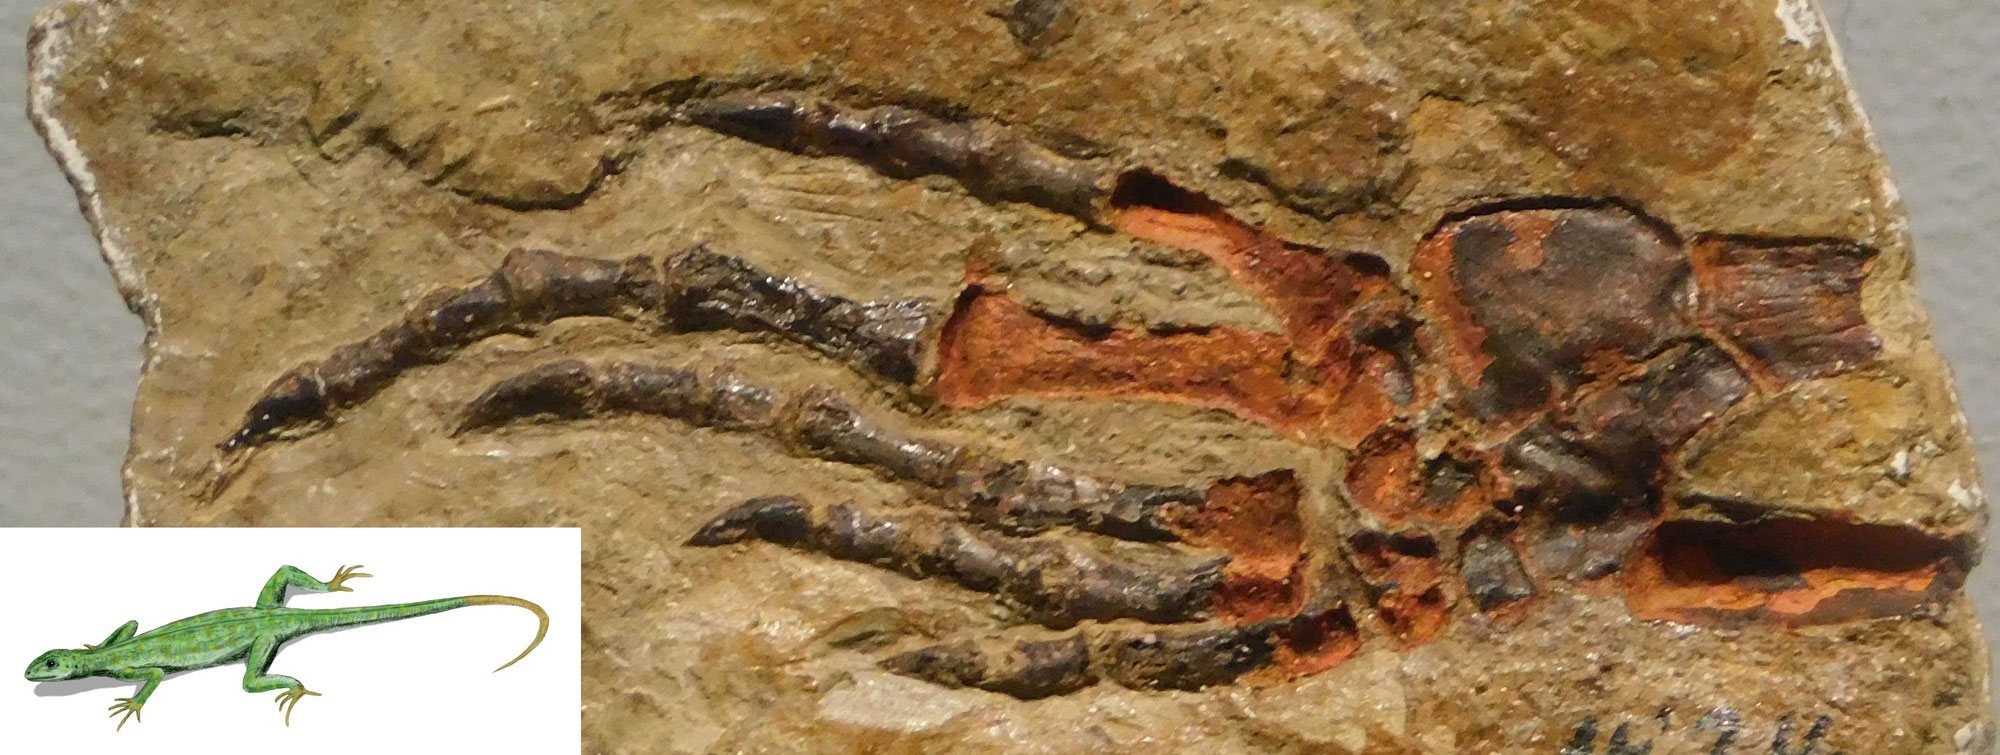 Photograph of the fossilized foot of a lizard-like animal from the Pennsylvanian of Kansas along with an inset illustration of what the animal may have looked like in life.